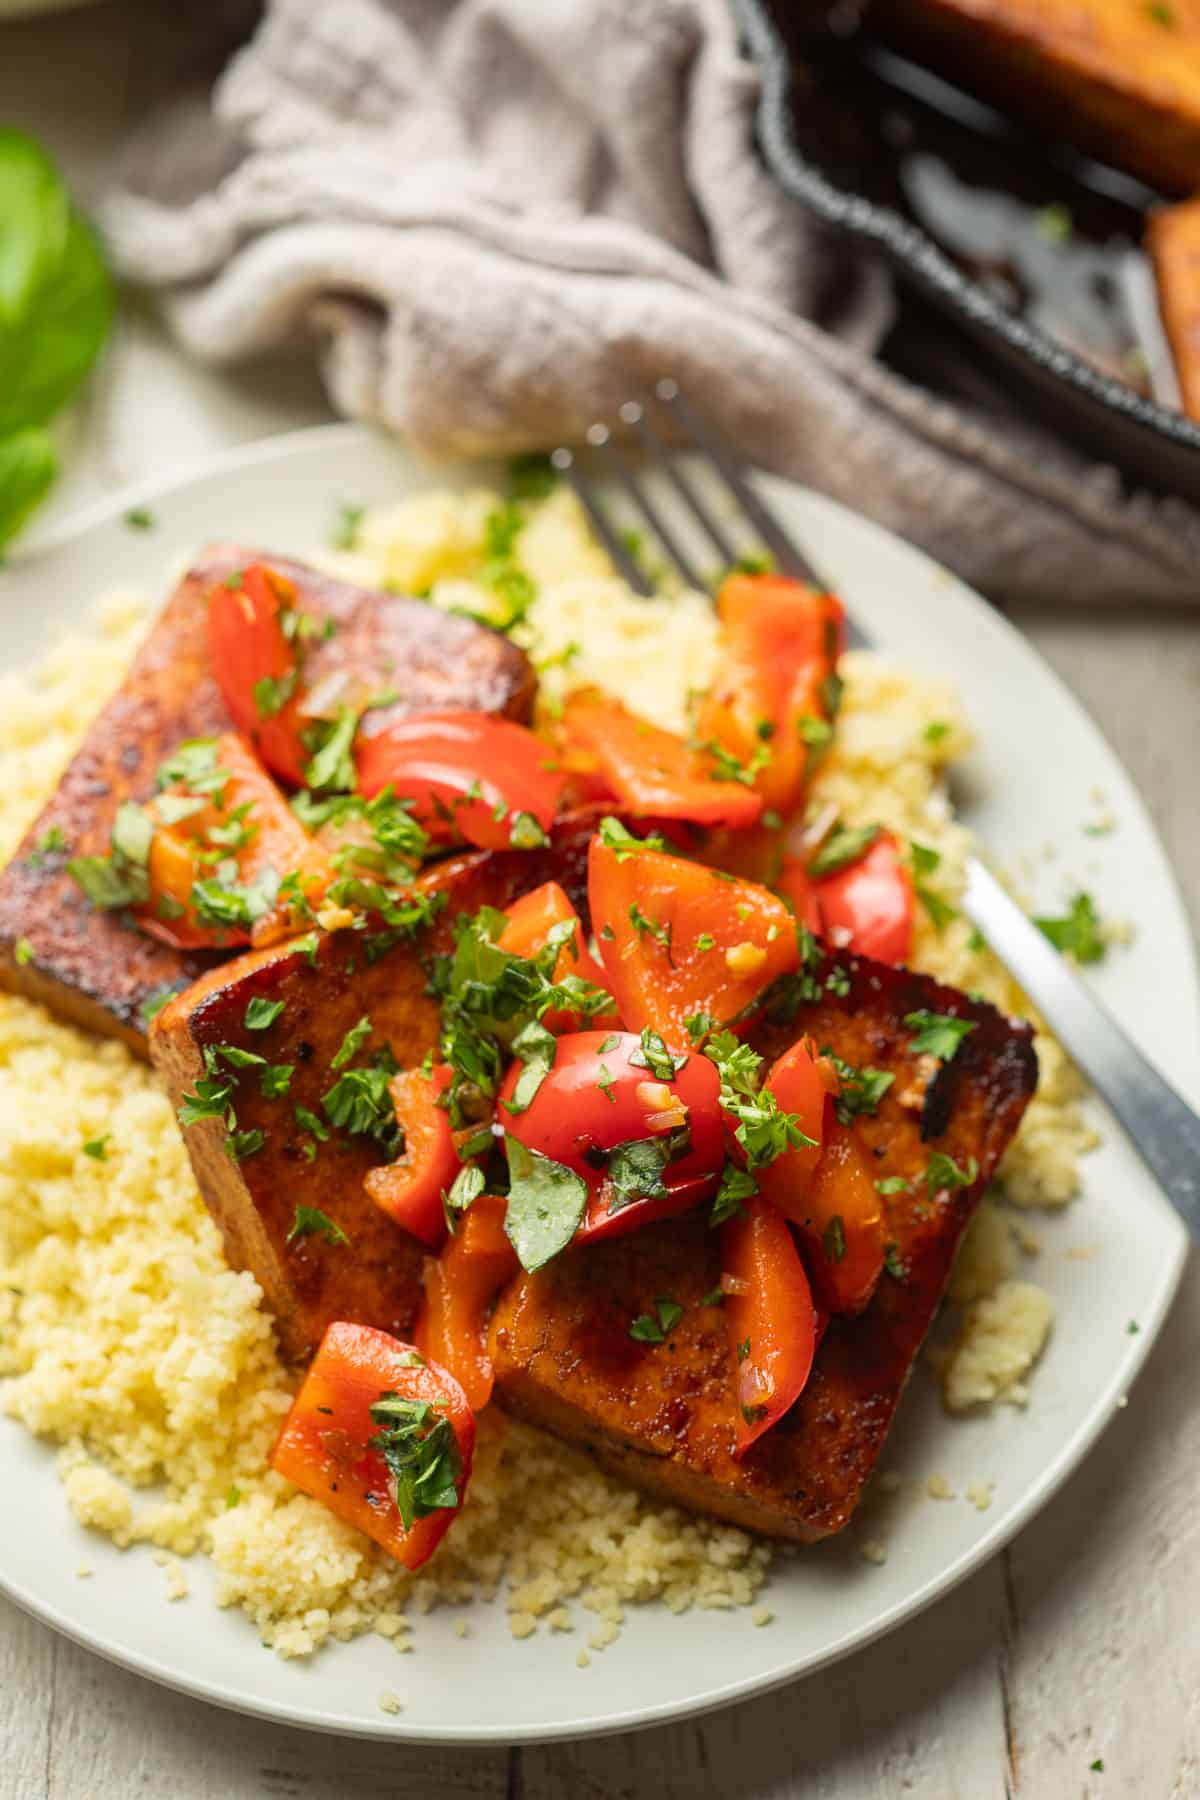 Balsamic Tofu Steaks over couscous on a plate, with a cast iron skillet in the background.